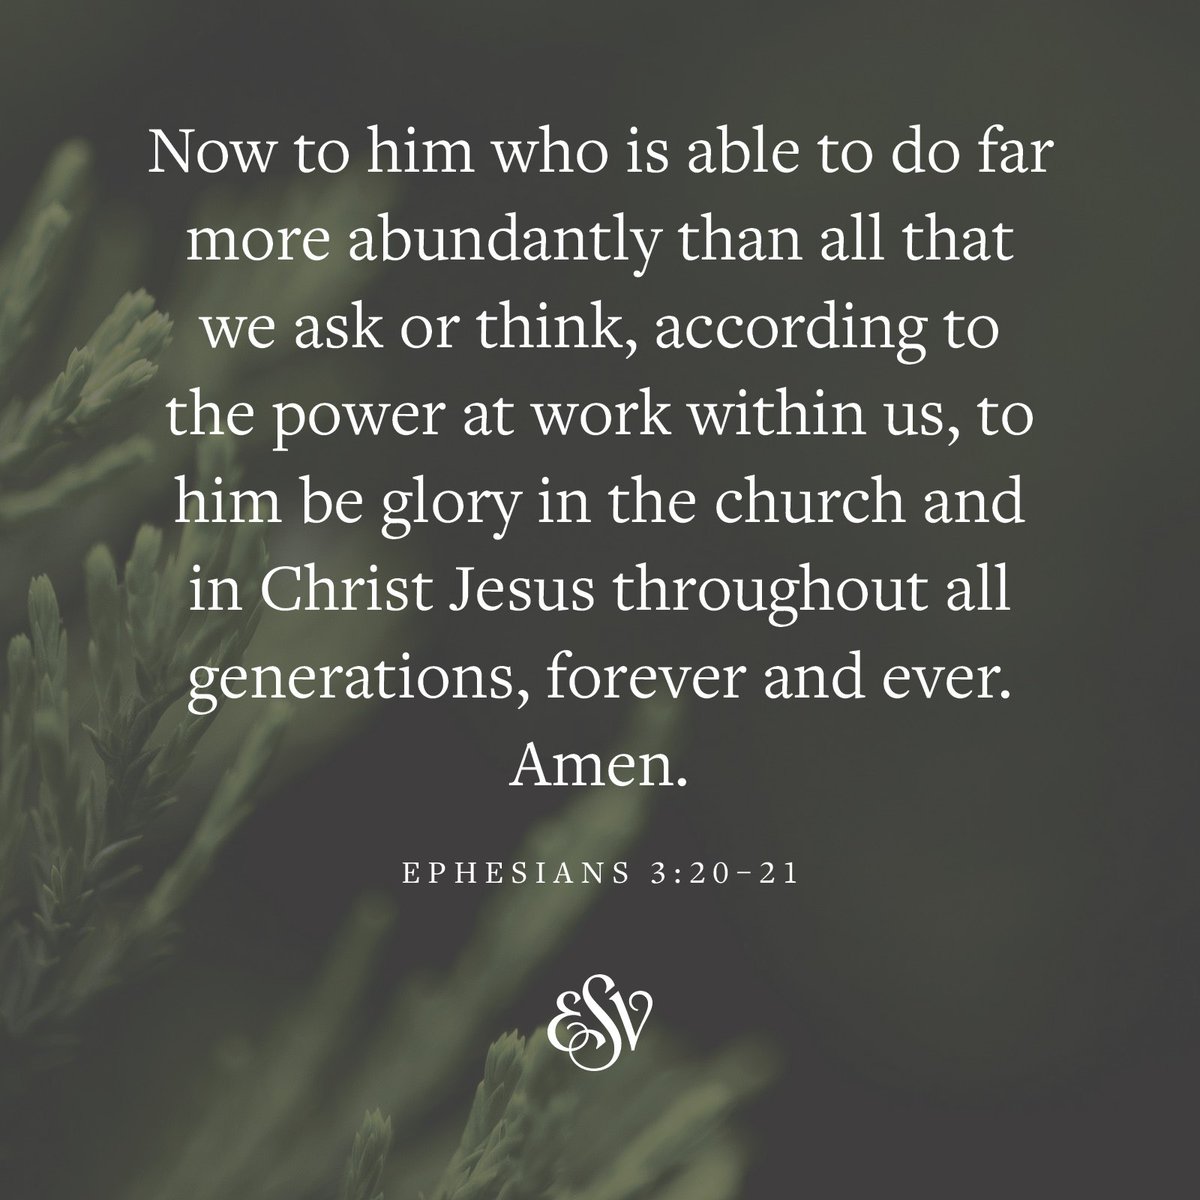 Now to him who is able to do far more abundantly than all that we ask or think, according to the power at work within us, to him be glory in the church and in Christ Jesus throughout all generations, forever and ever. Amen. —Ephesians 3:20-21 ESV.org #ESV #Bible